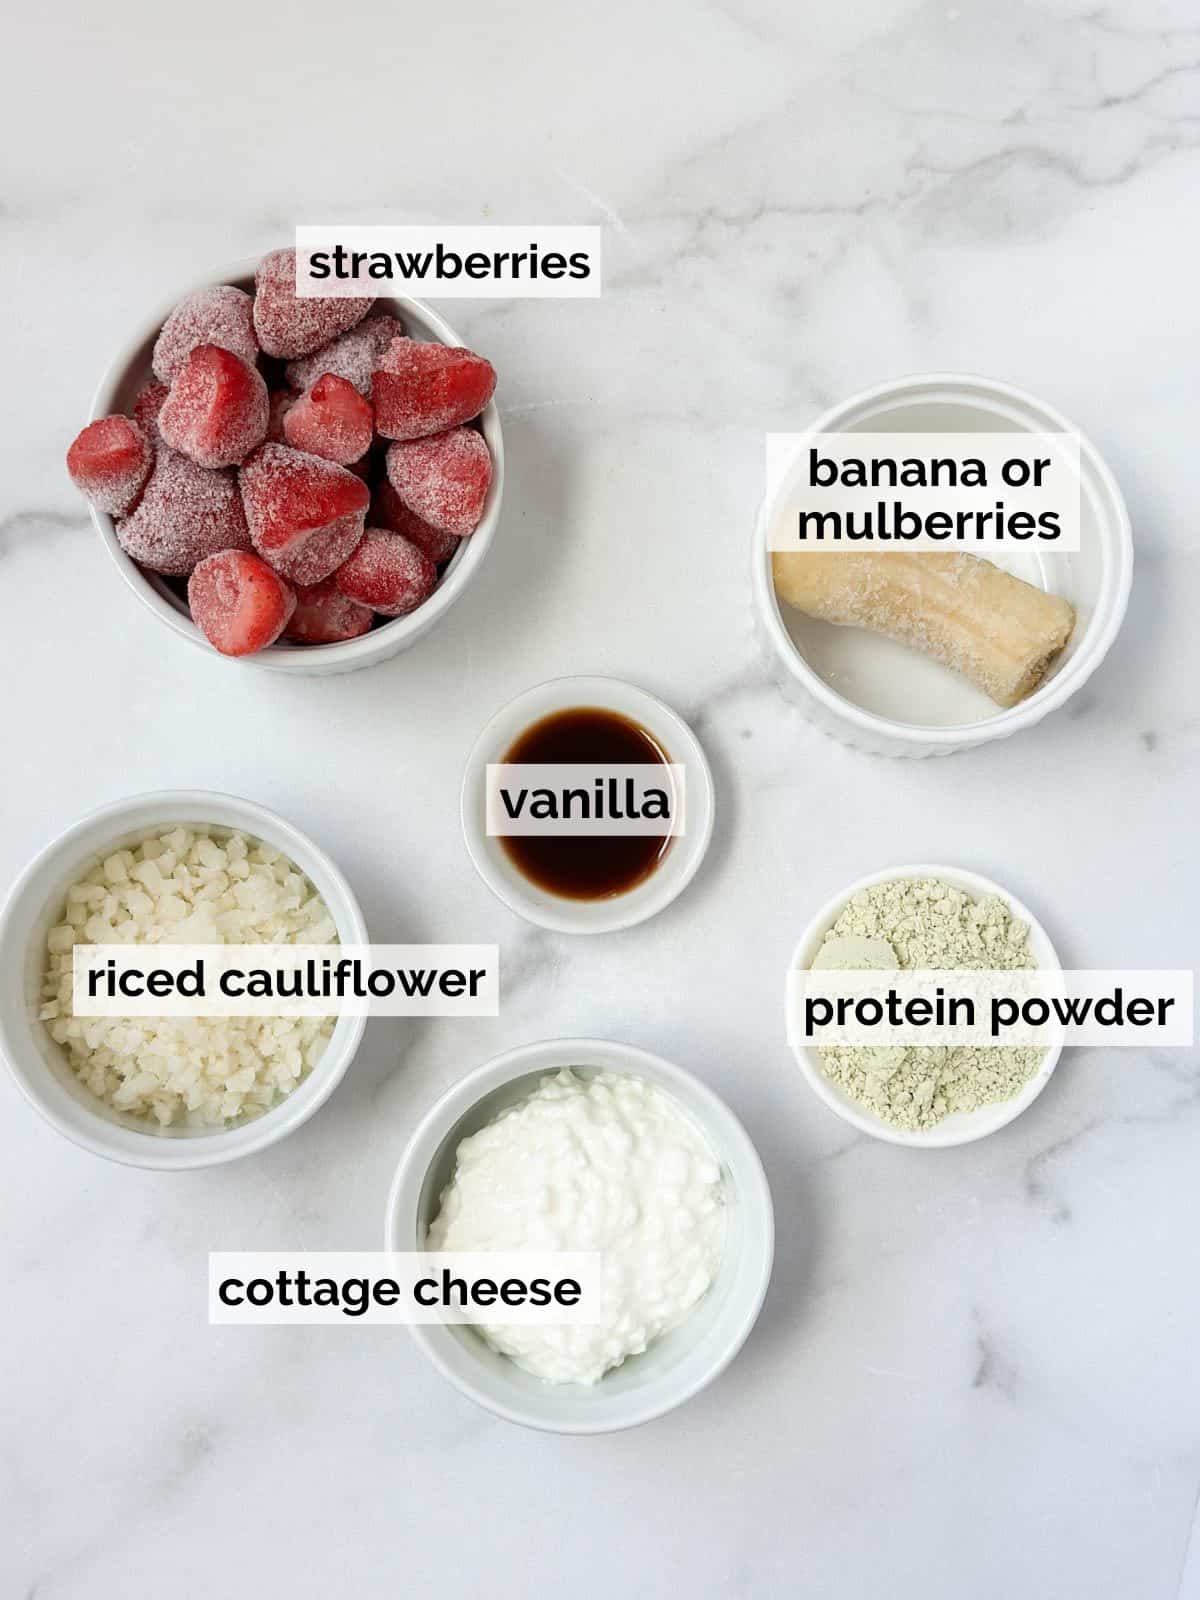 Frozen berries, cottage cheese, vanilla, and protein powder on a marble background.